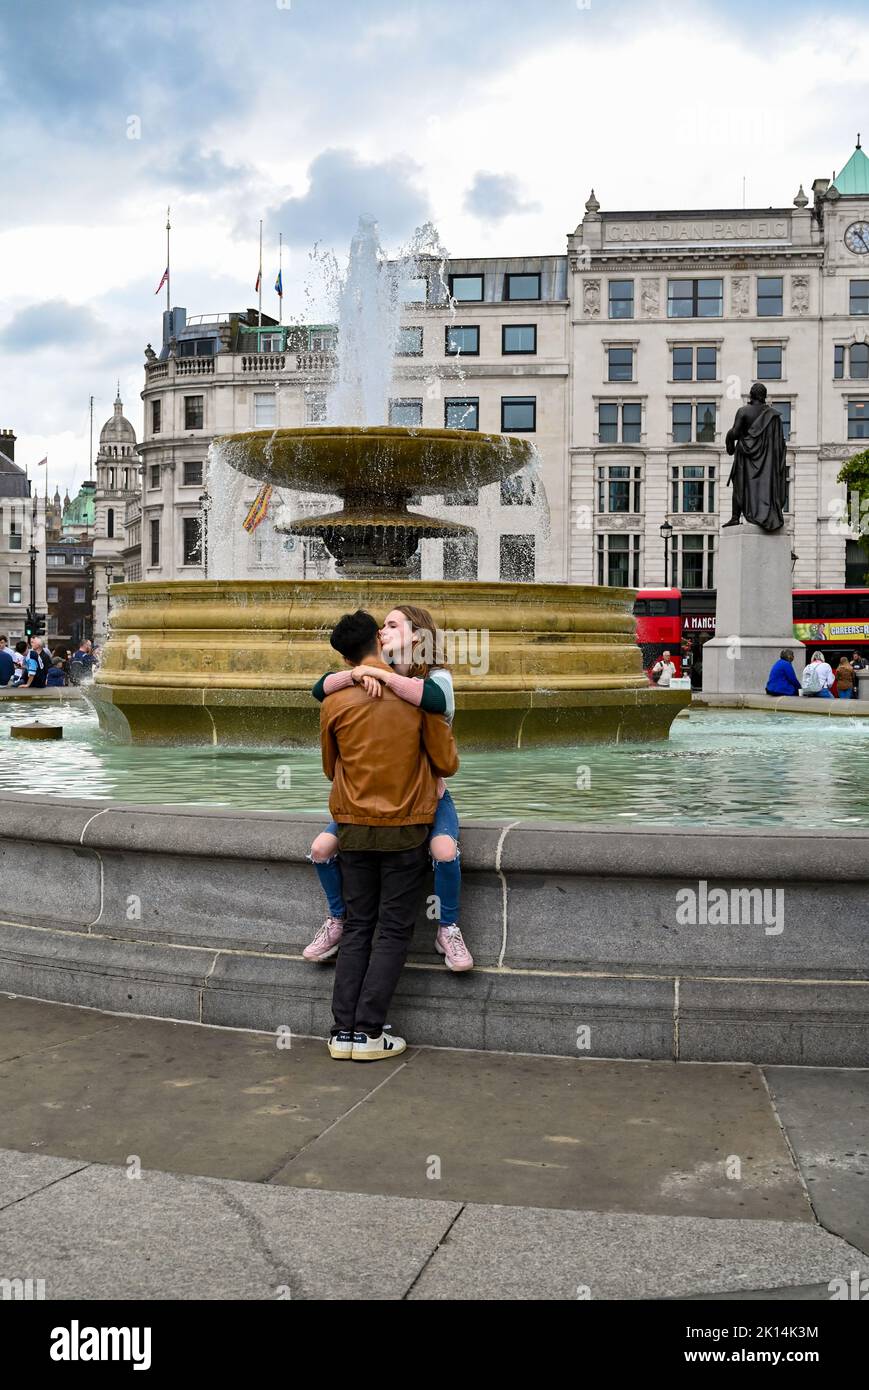 Trafalgar Square London UK - Paares together by one of the Fountains in the Square Photograph taken by Simon Dack Stockfoto